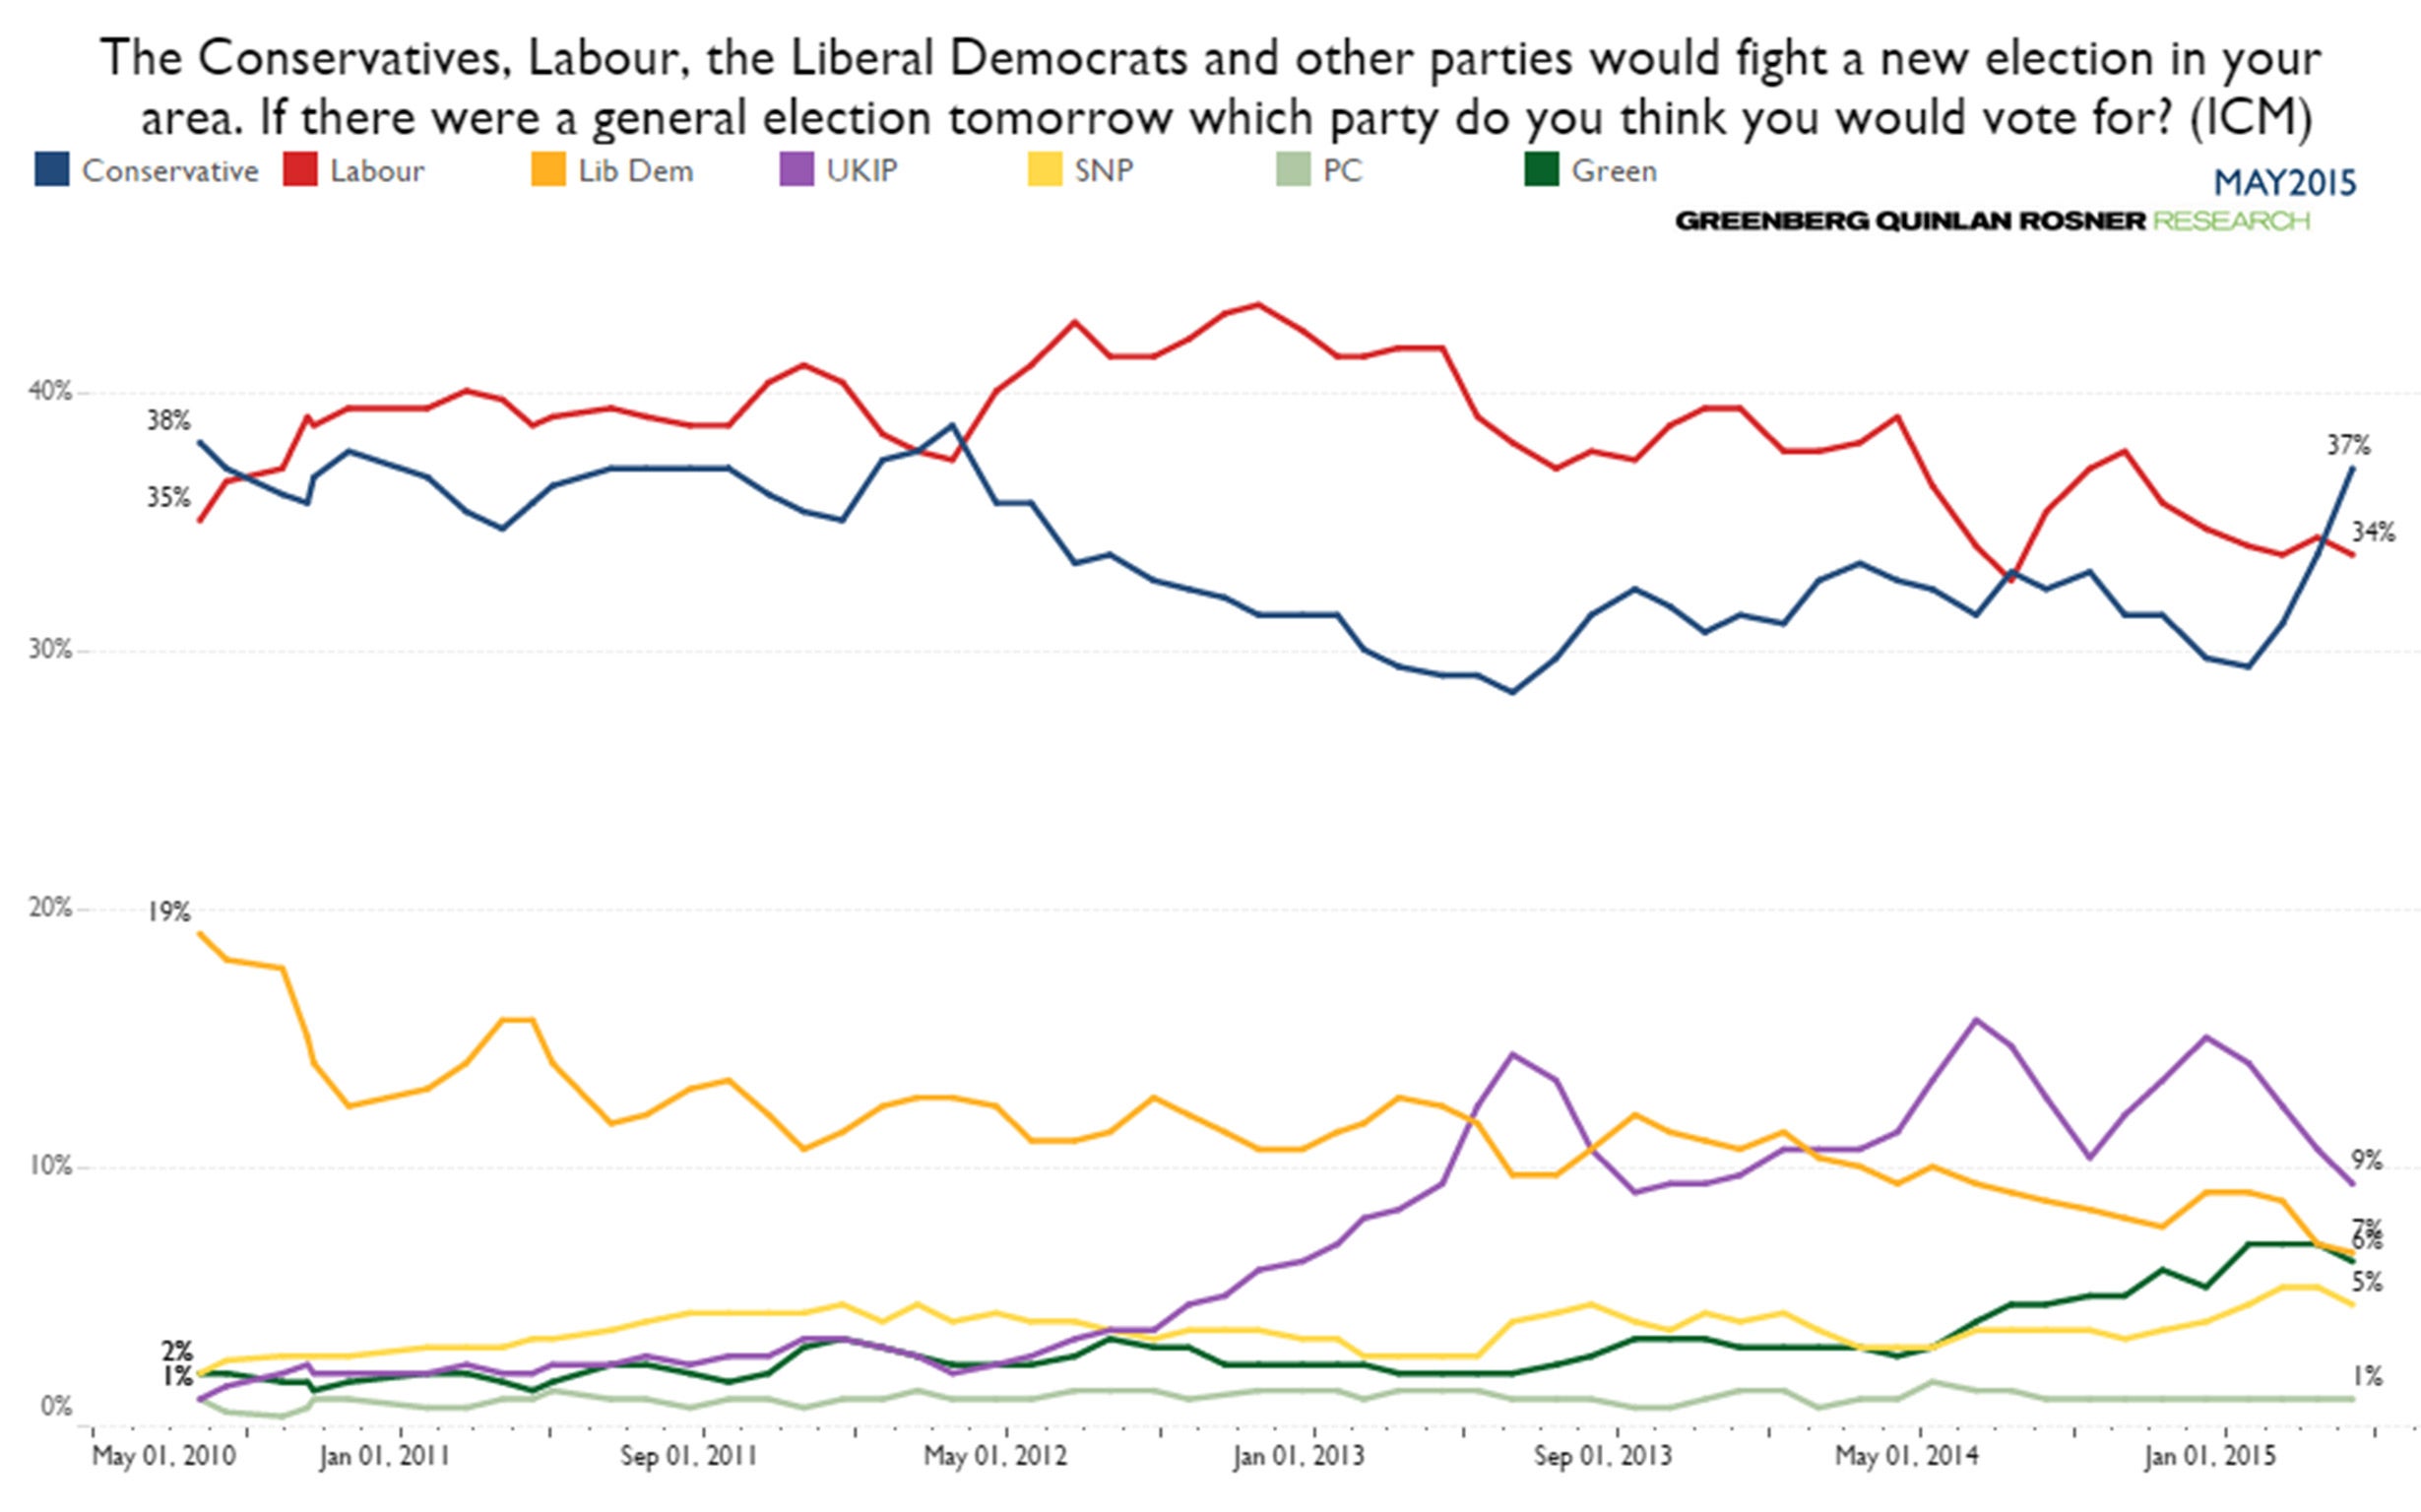 A graph showing the latest ICM poll, courtesy of may2015.com